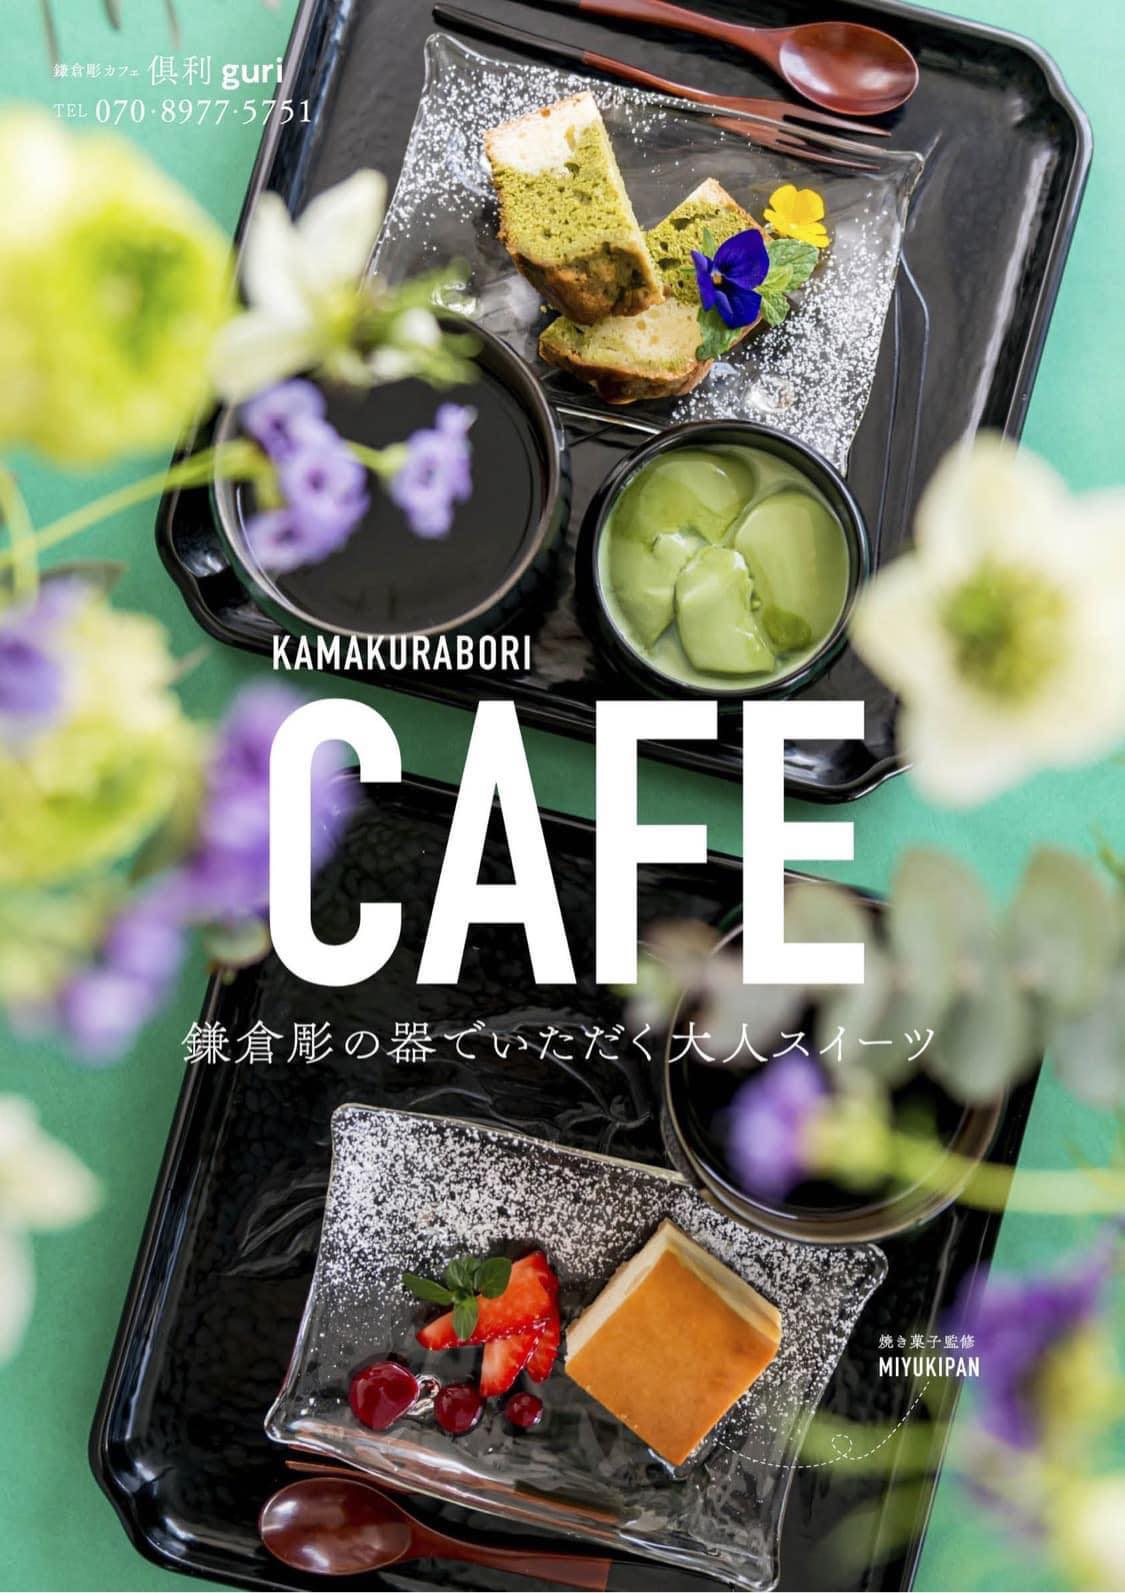 【Cafe time】